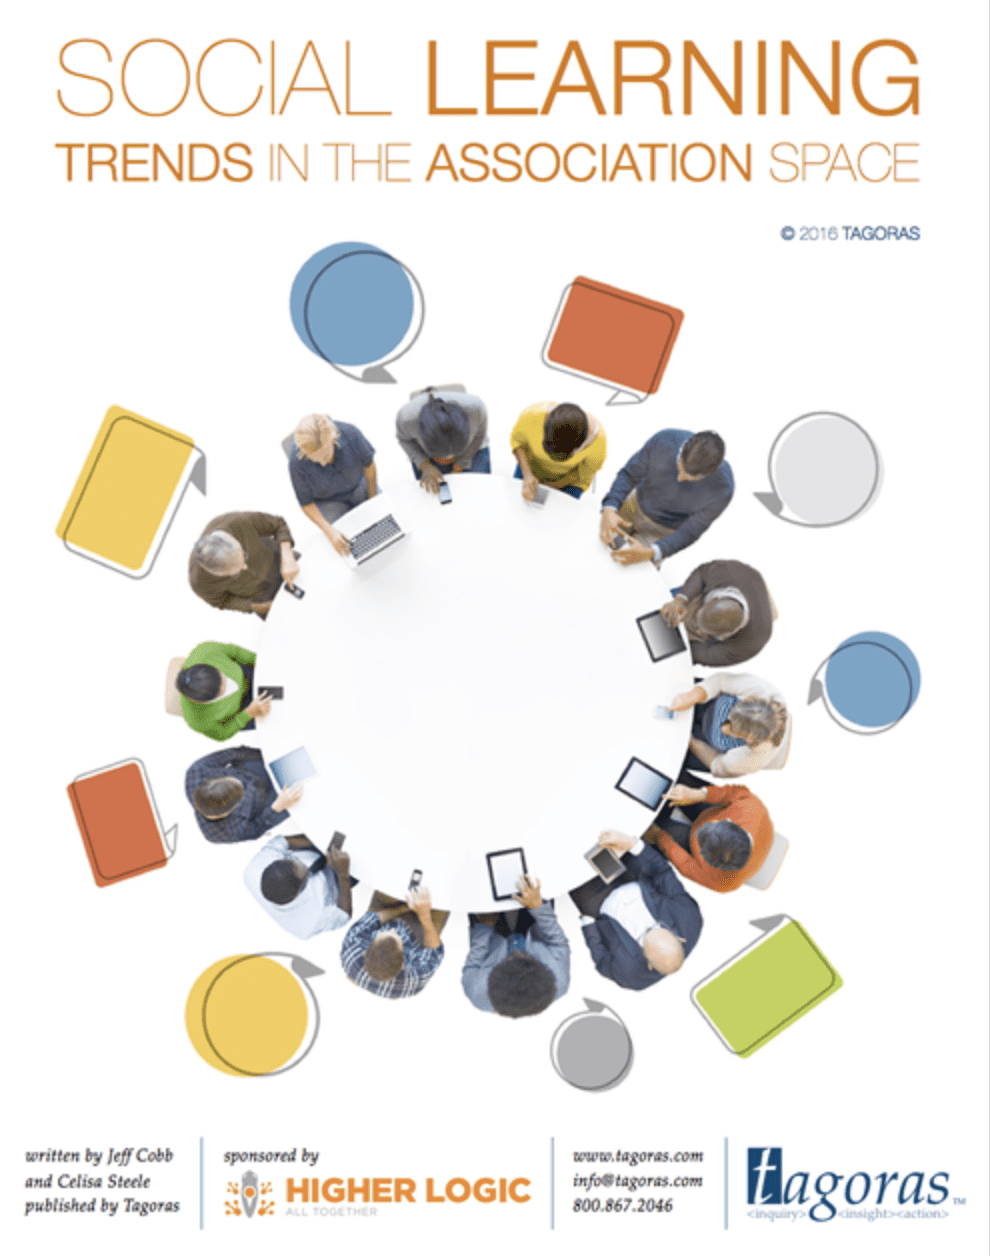 Social Learning Trends in the Association Space